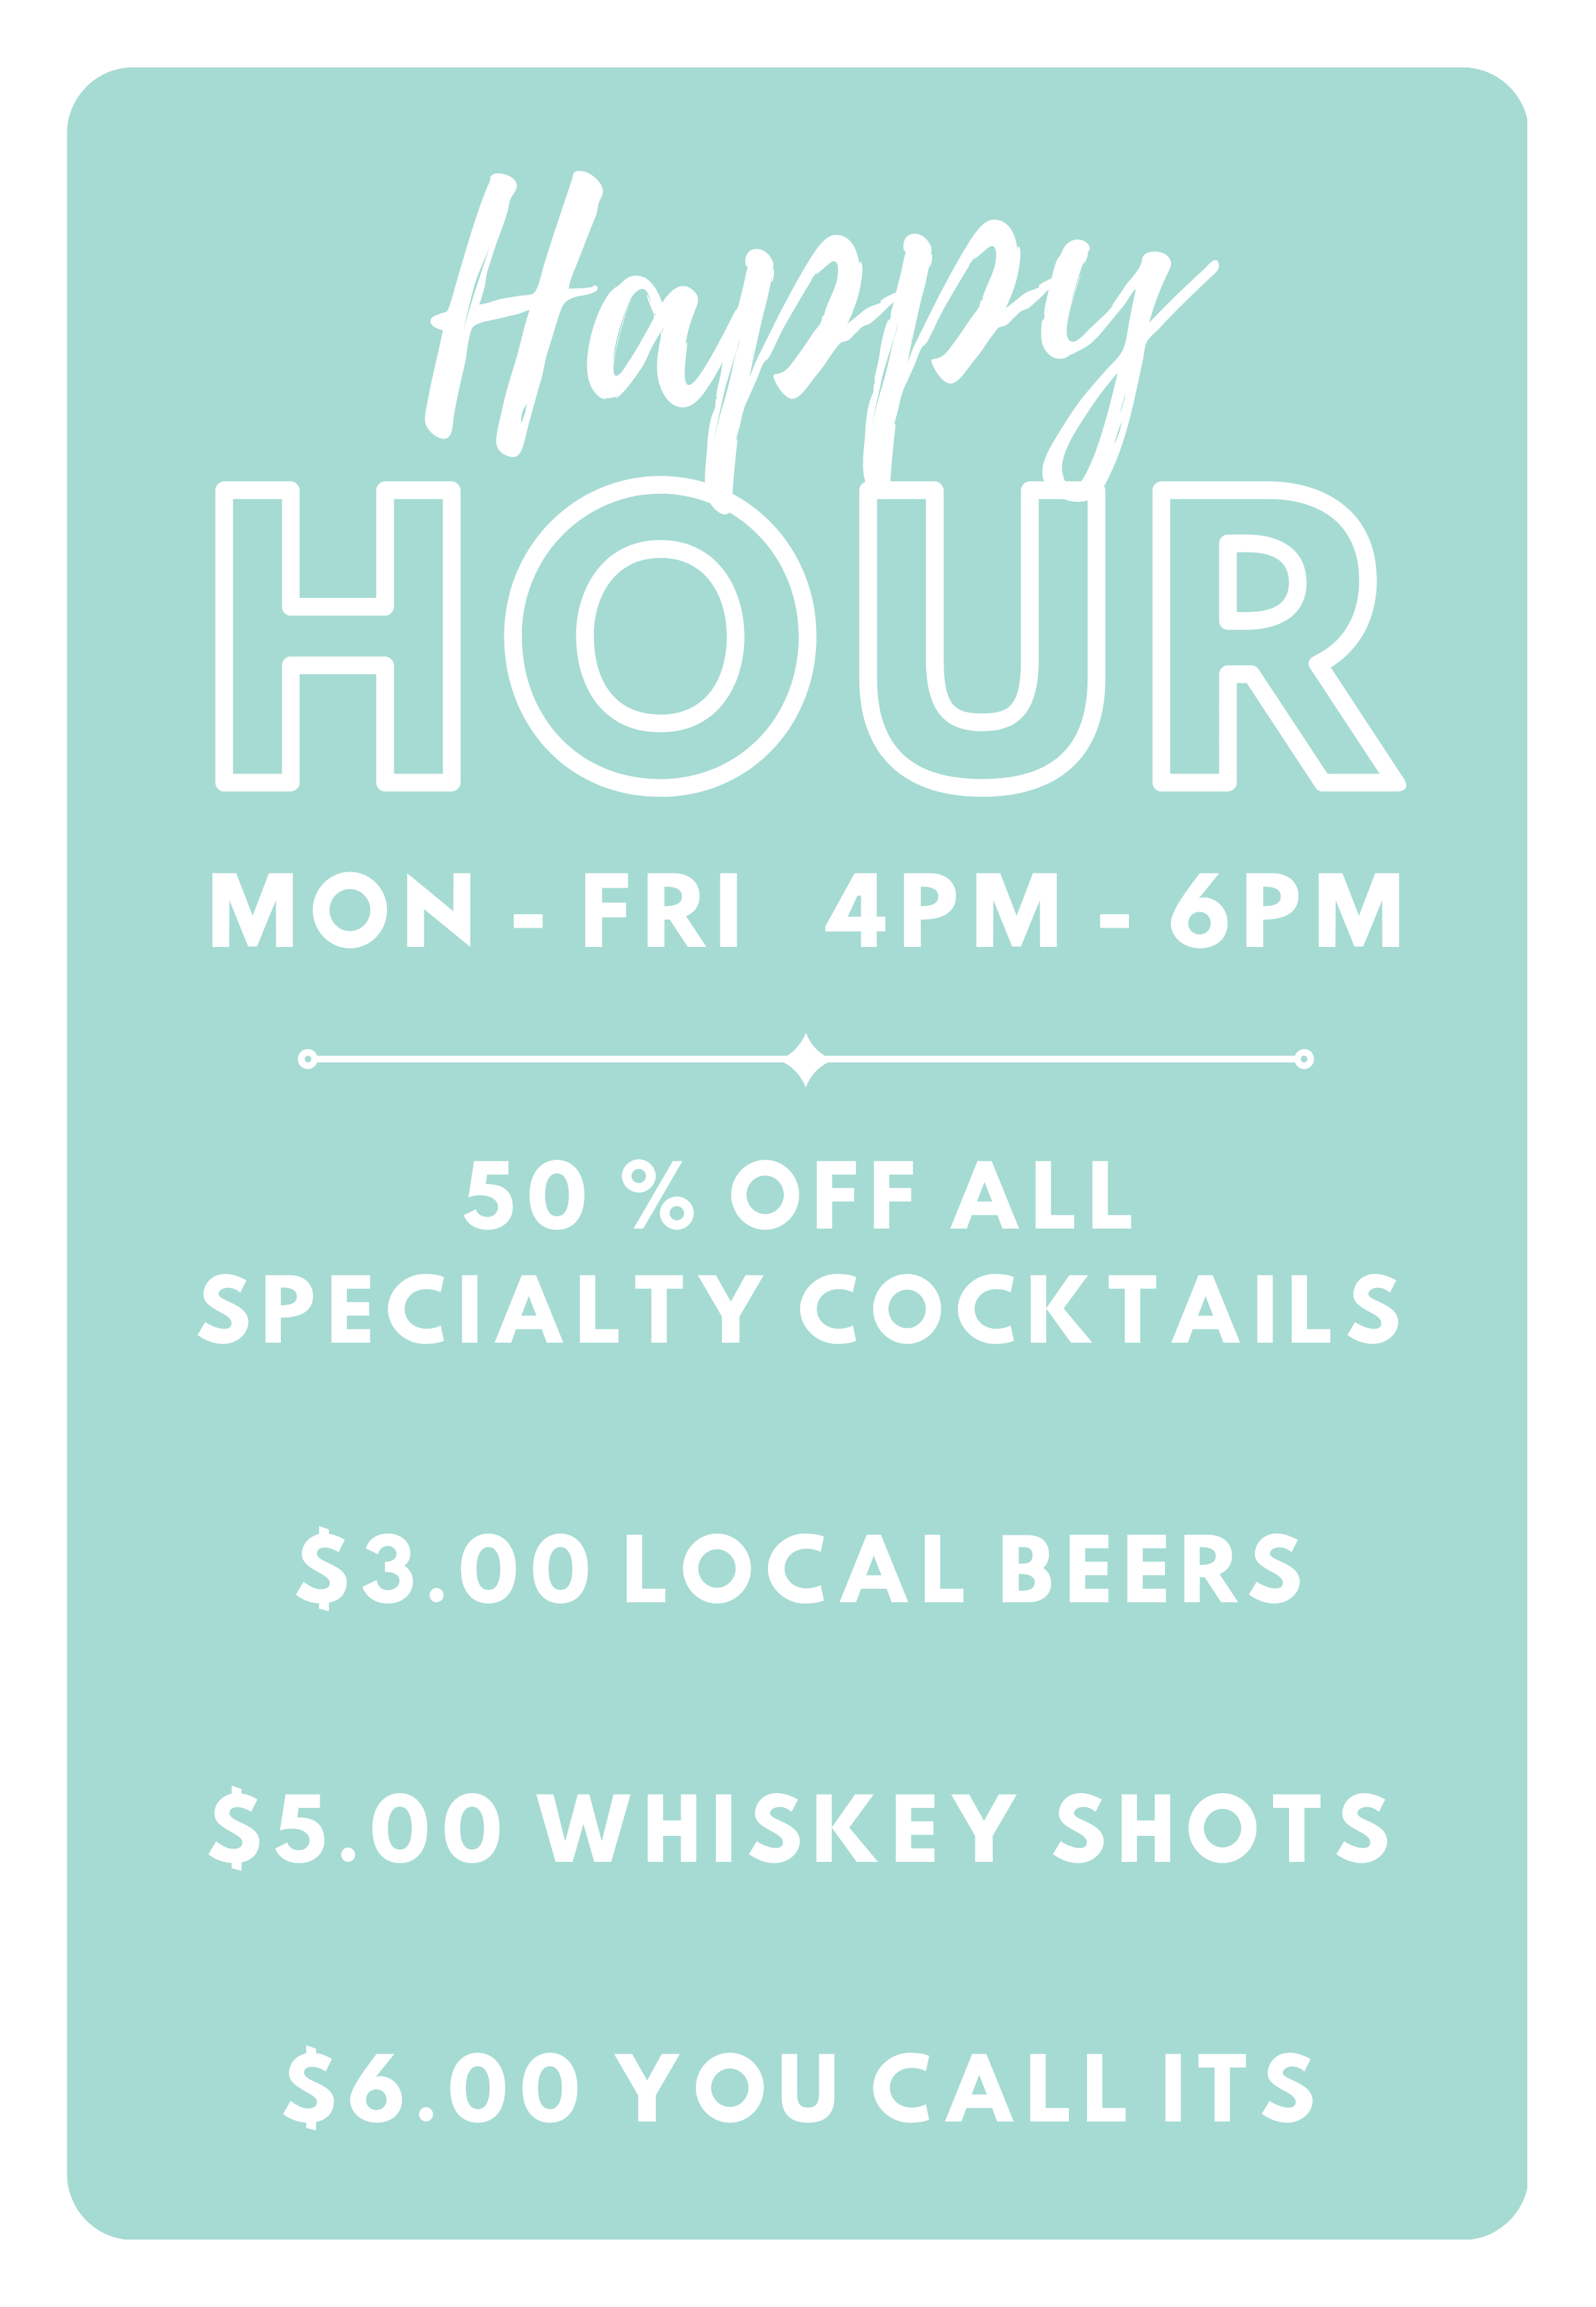 Happy Hour - Mon through Fri: 4pm - 6pm. 50% off specialty cocktails, $3.00 local beers, $5.00 whisky shots!